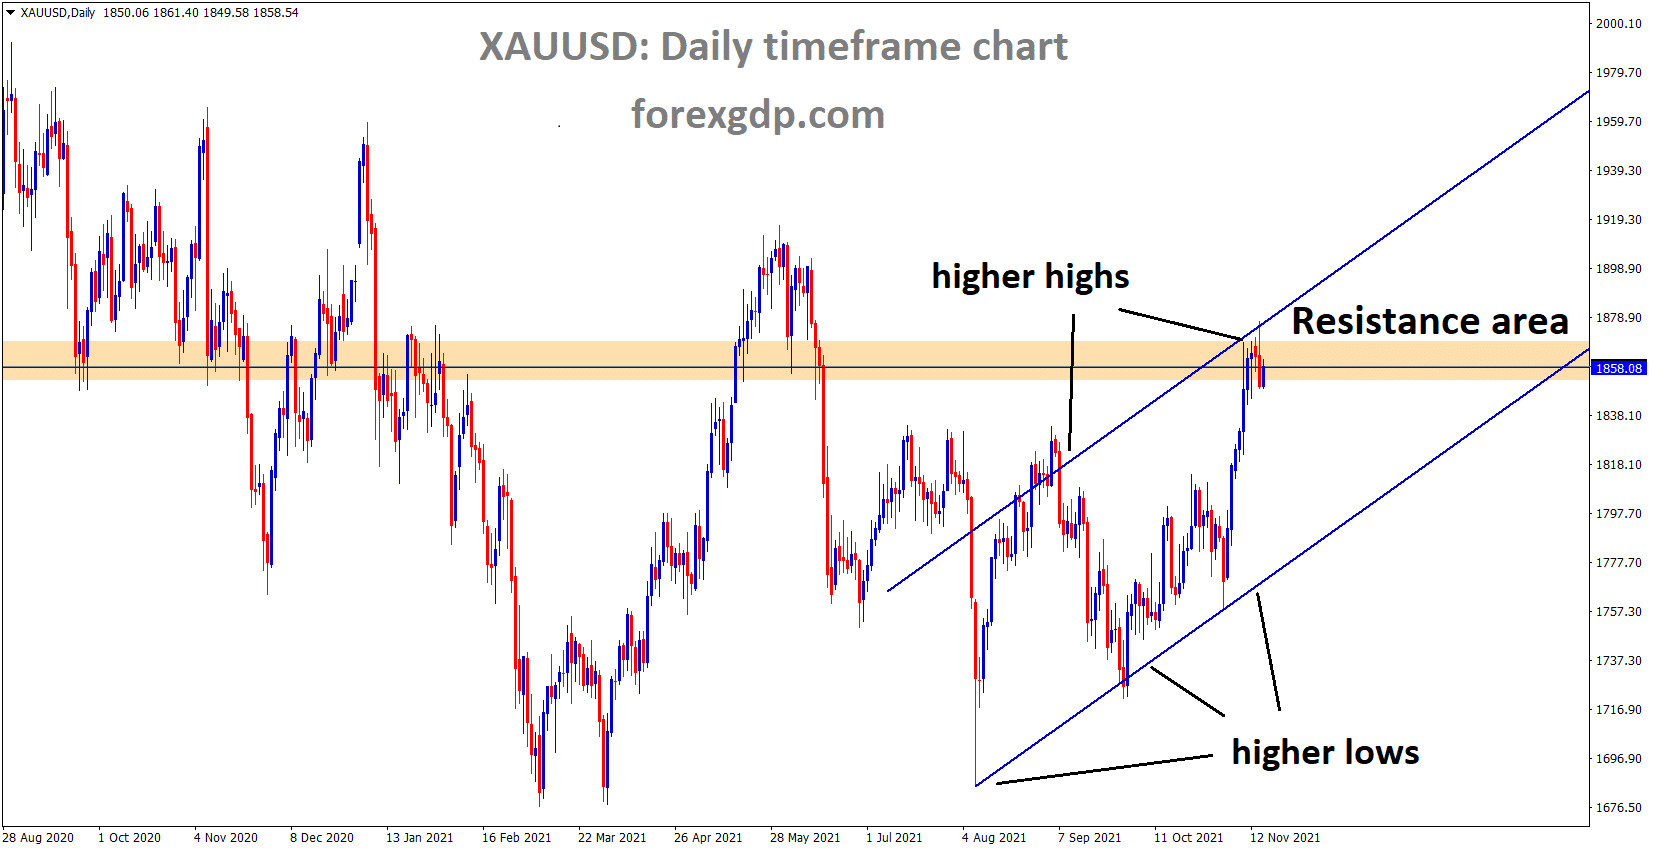 XAUUSD Gold prices are moving in an Ascending channel and market price is consolidating at the top of the channel